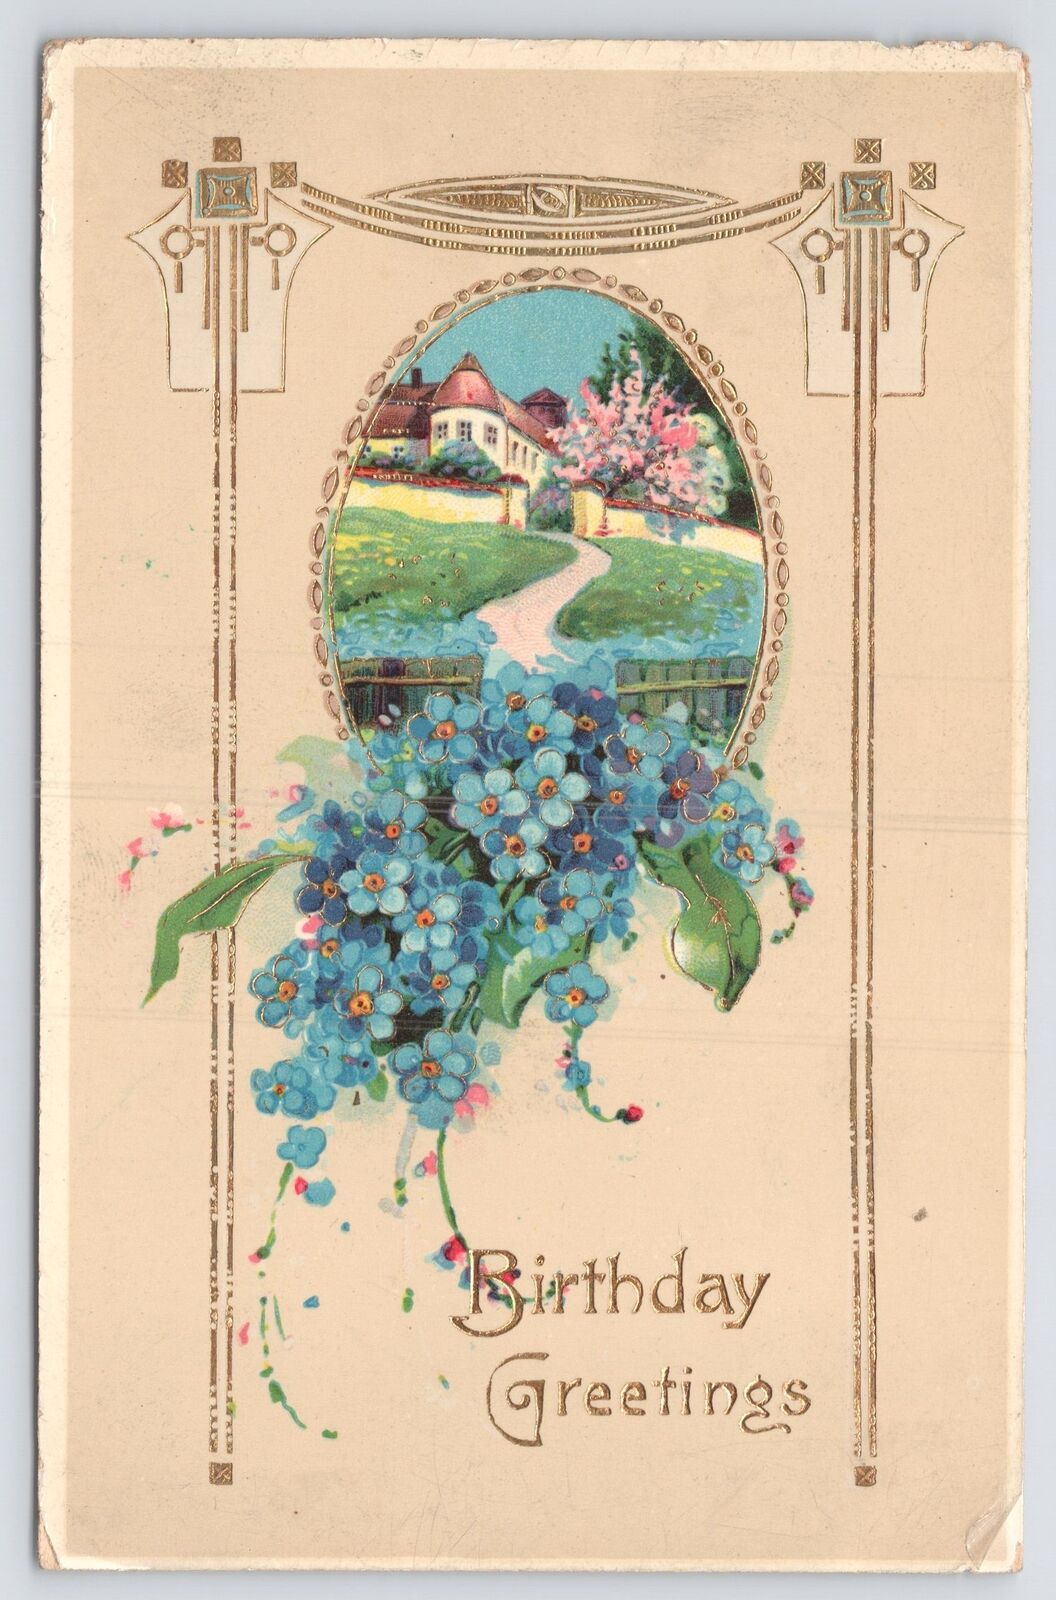 Greetings~Forget Me Nots & Home On Hill Birthday Greeting~Vintage Postcard